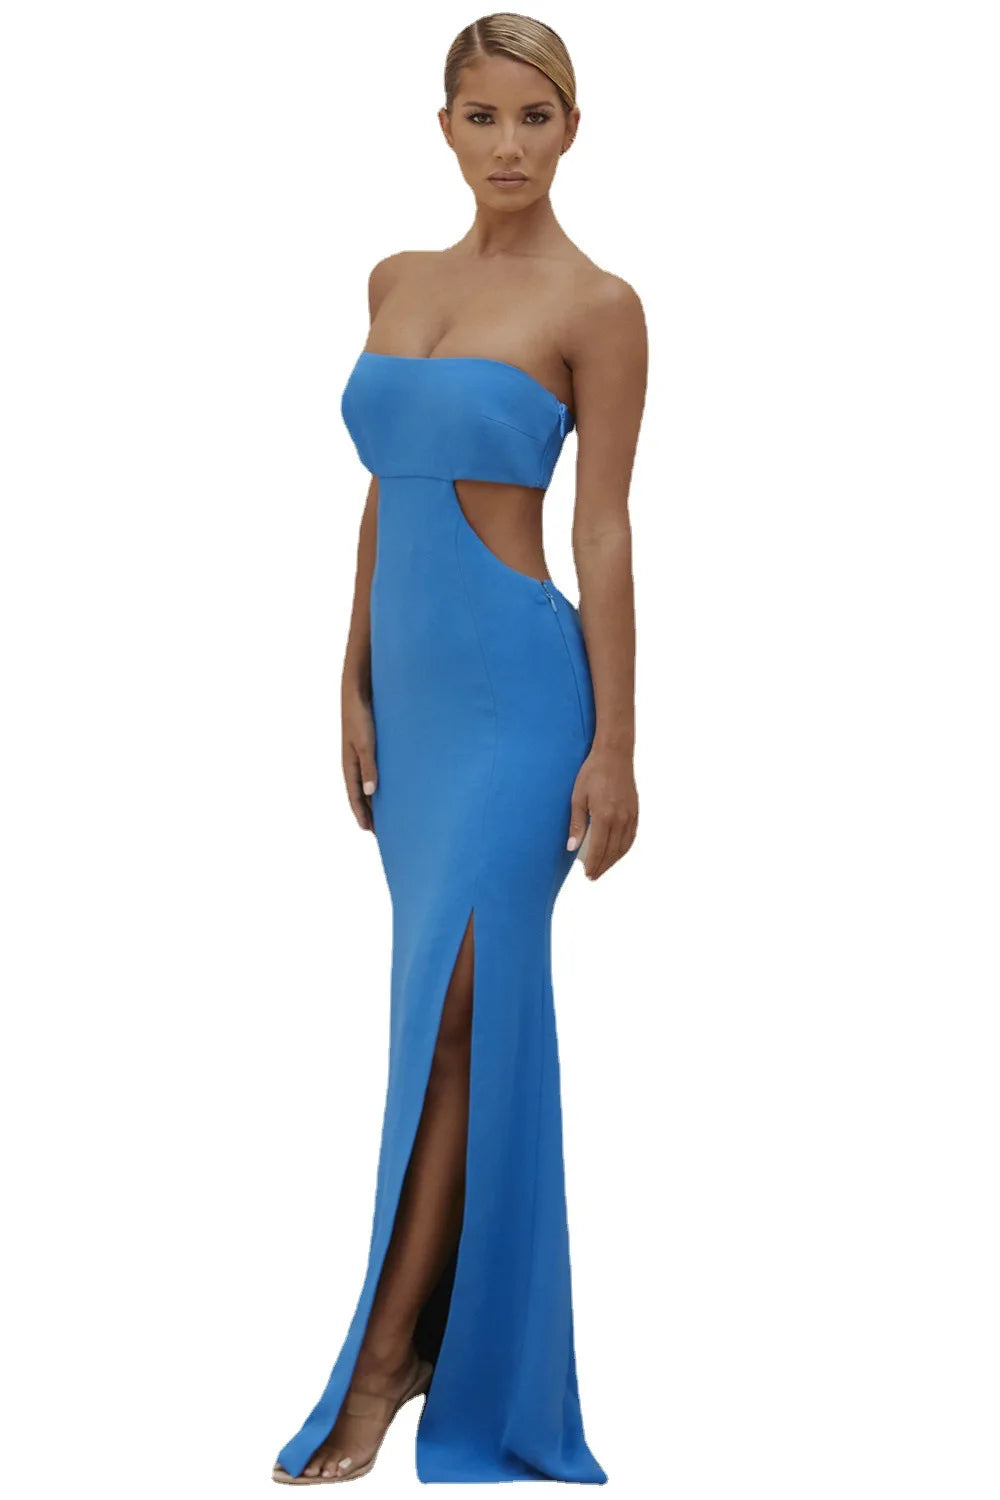 Bodycon Blue Cut Out Strapless Off The Shoulder Bandage Maxi Long Dress Women Elegant Sleeveless Backless Evening Party Dresses